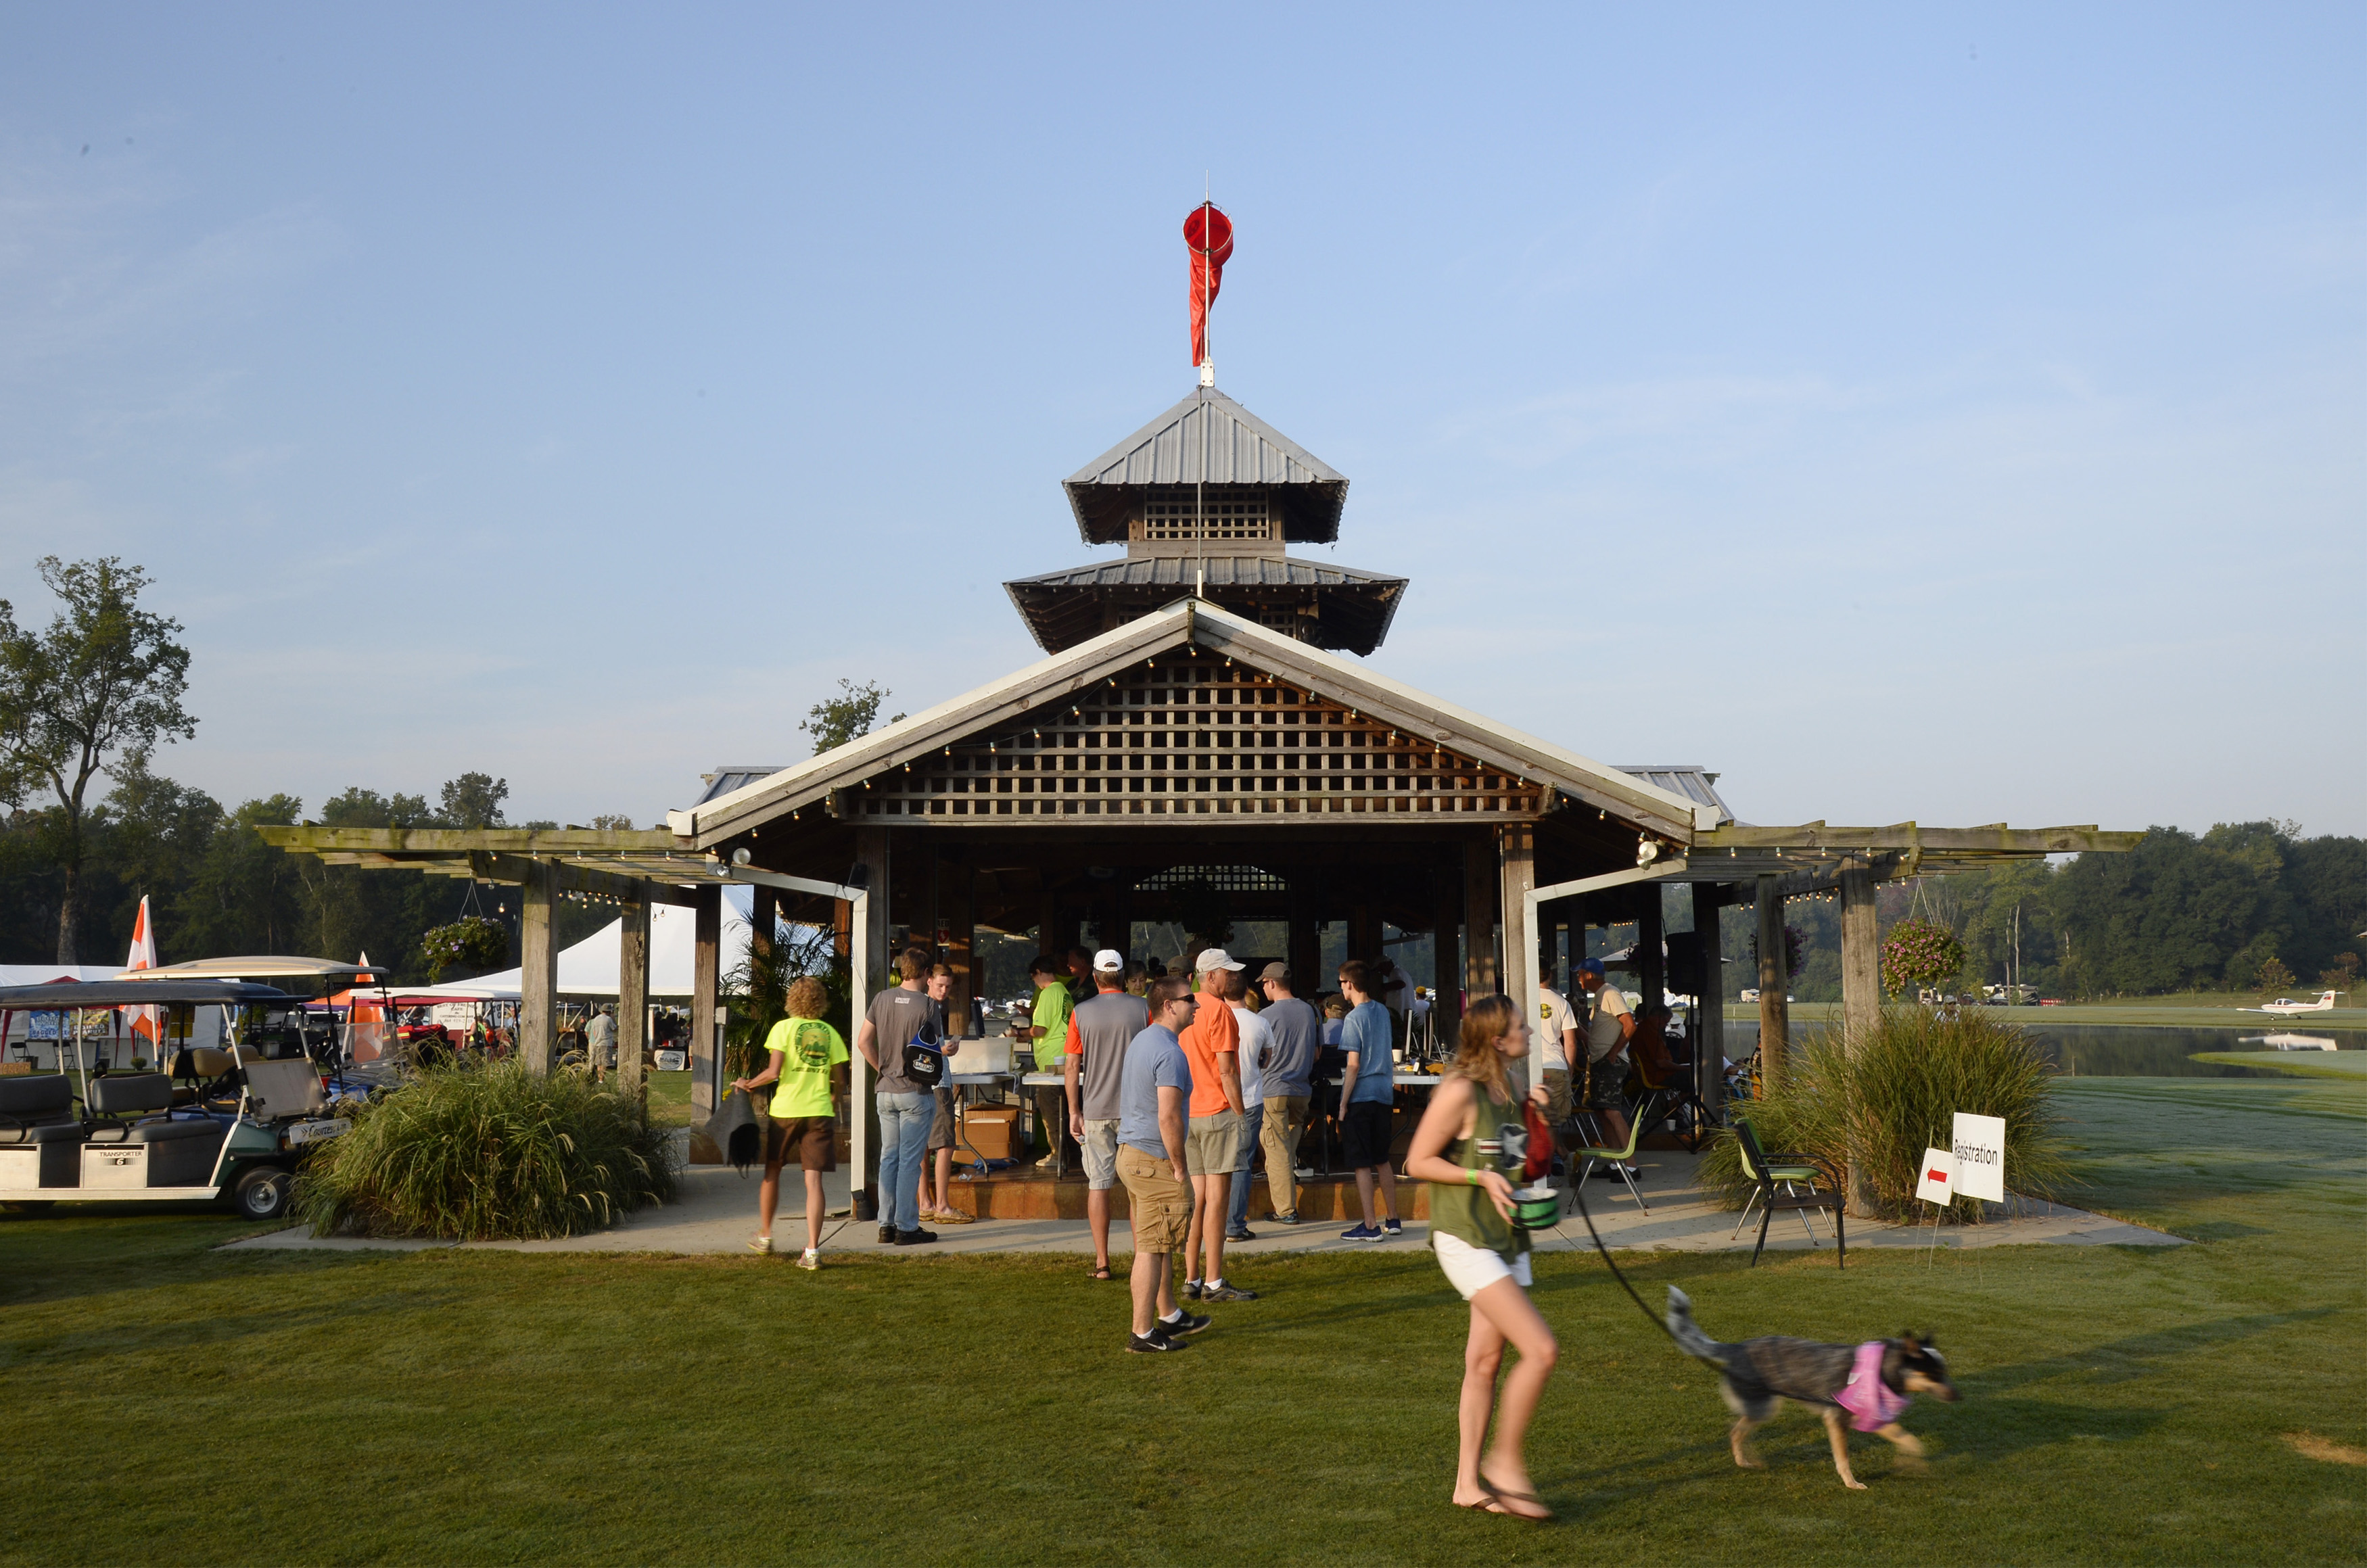 Triple Tree Aerodrome's main gazebo is a gathering spot for aviators informally judging fellow pilots on their landings at the turf strip during a fly-in and campout in South Carolina. Photo by David Tulis.         